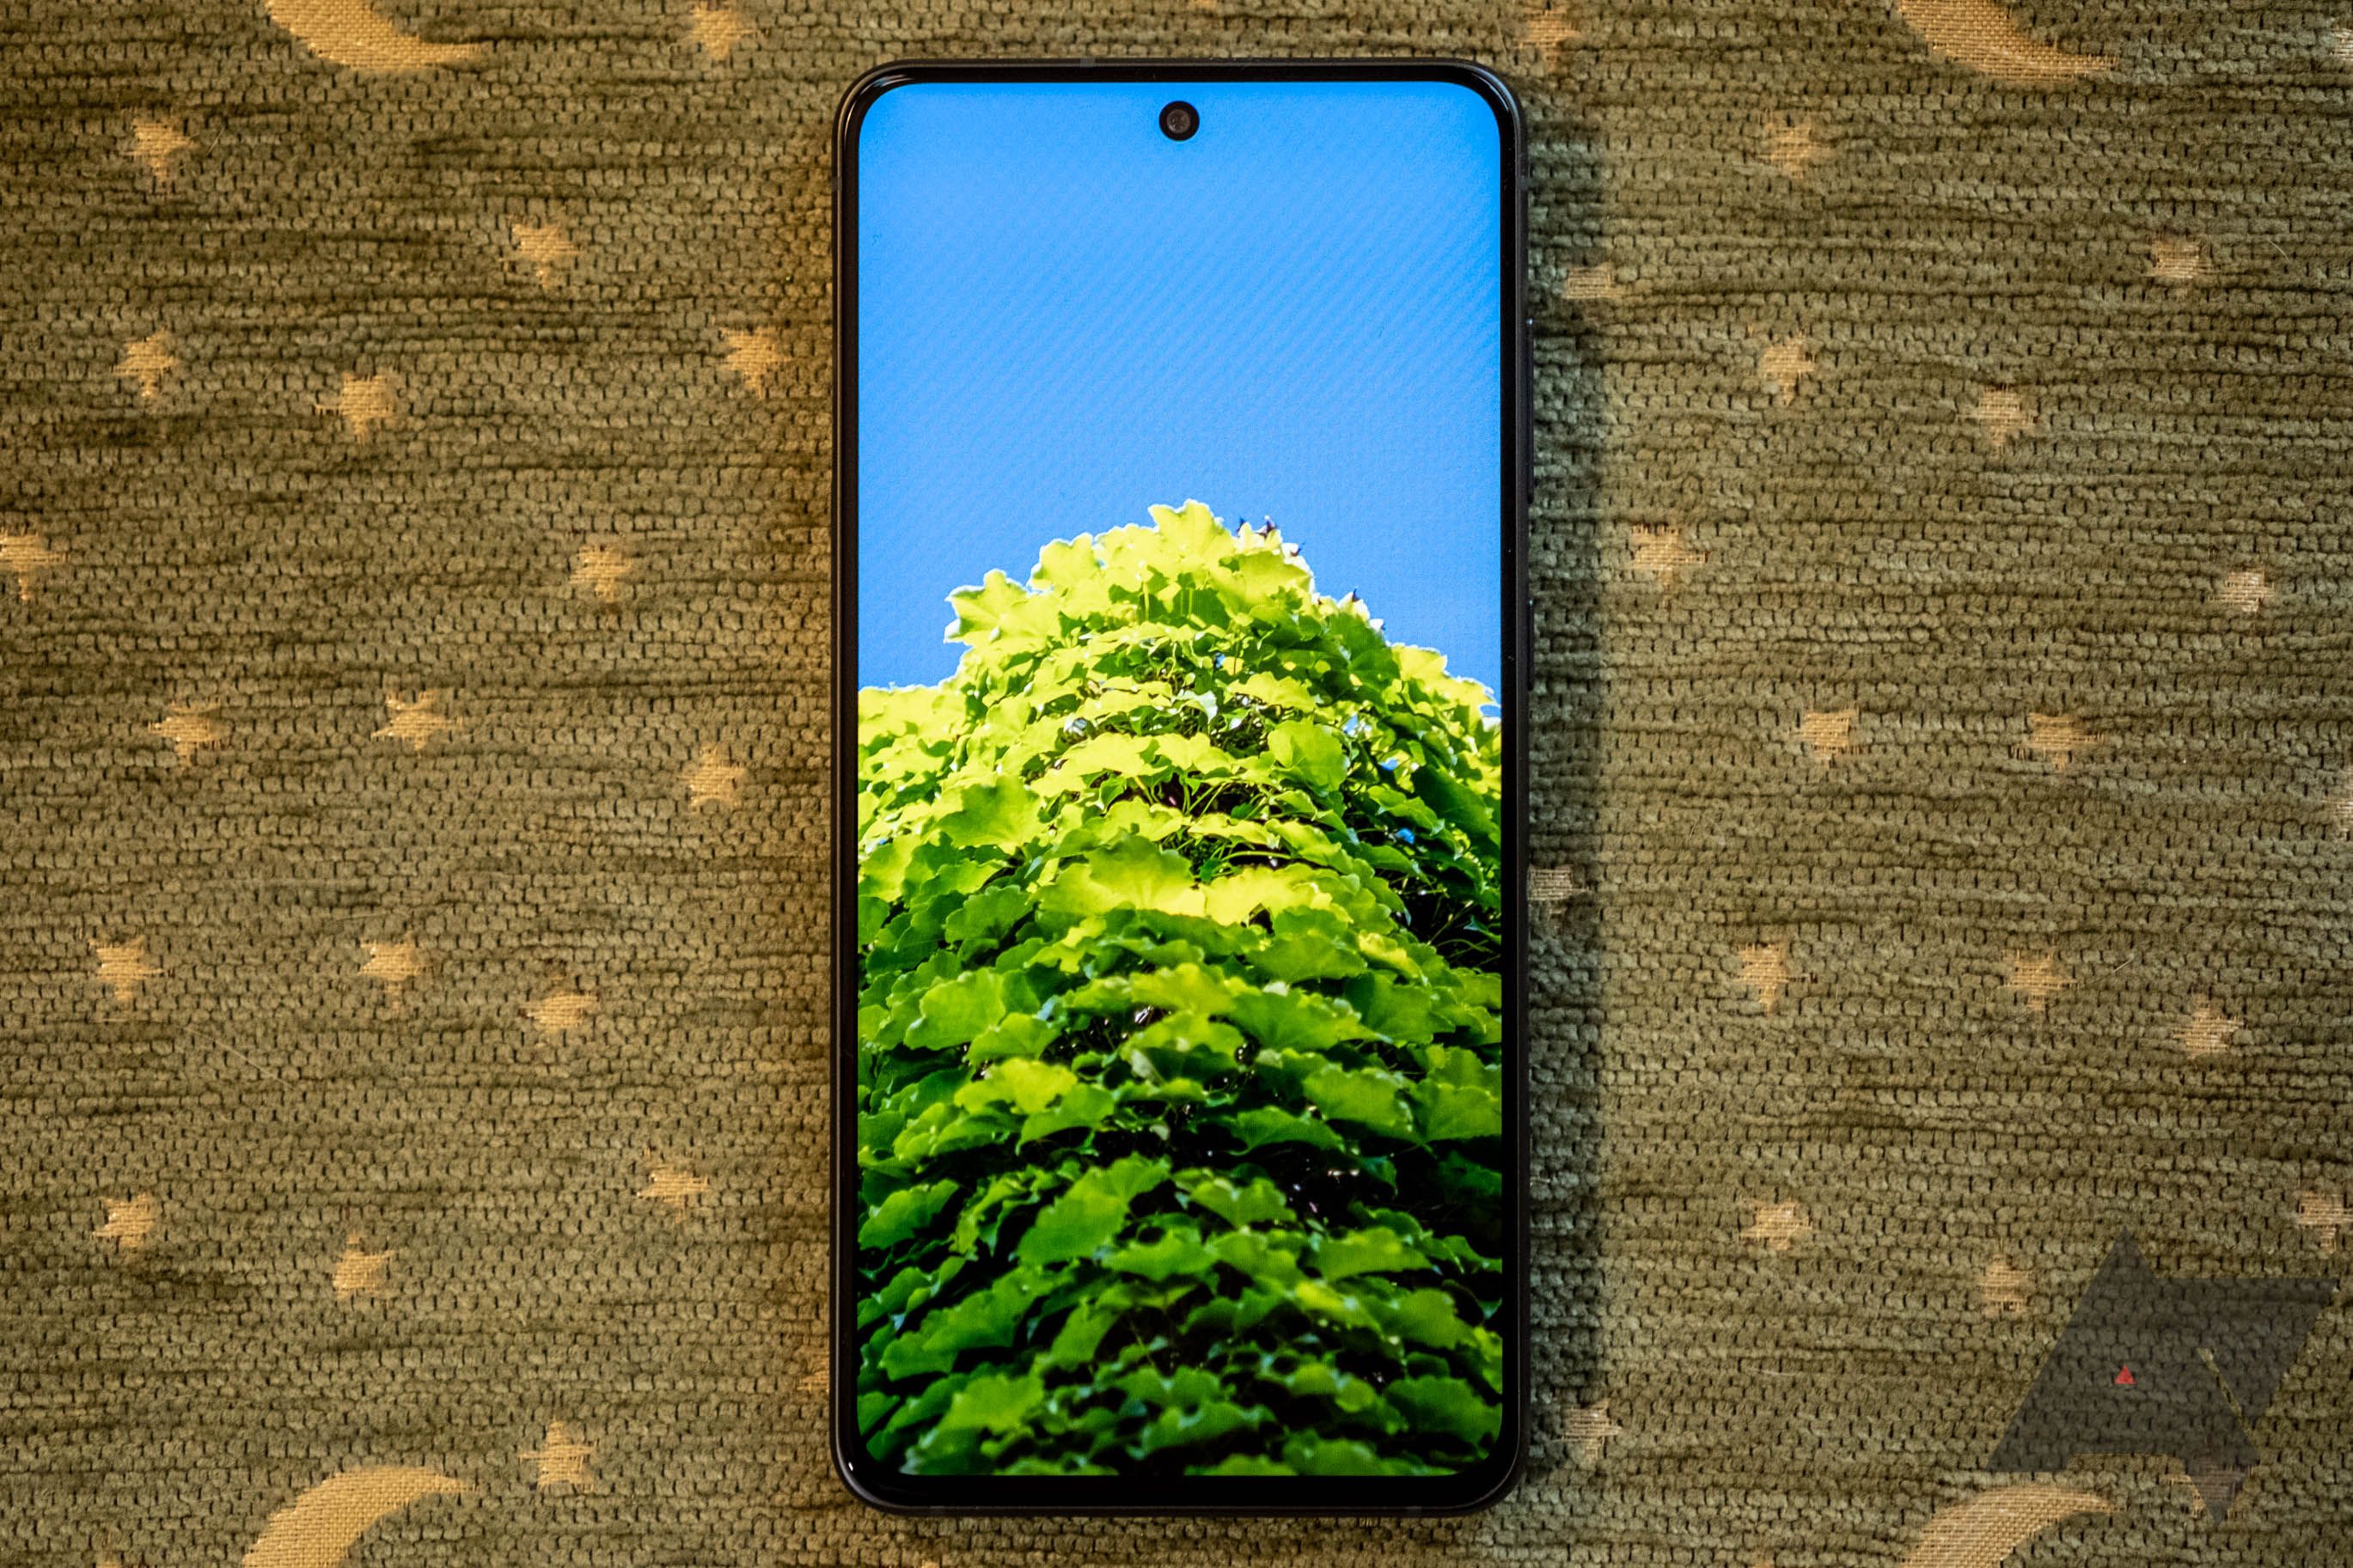 Samsung Galaxy S21 FE Review: 2021 Premium Specs in 2022 for Solid Value